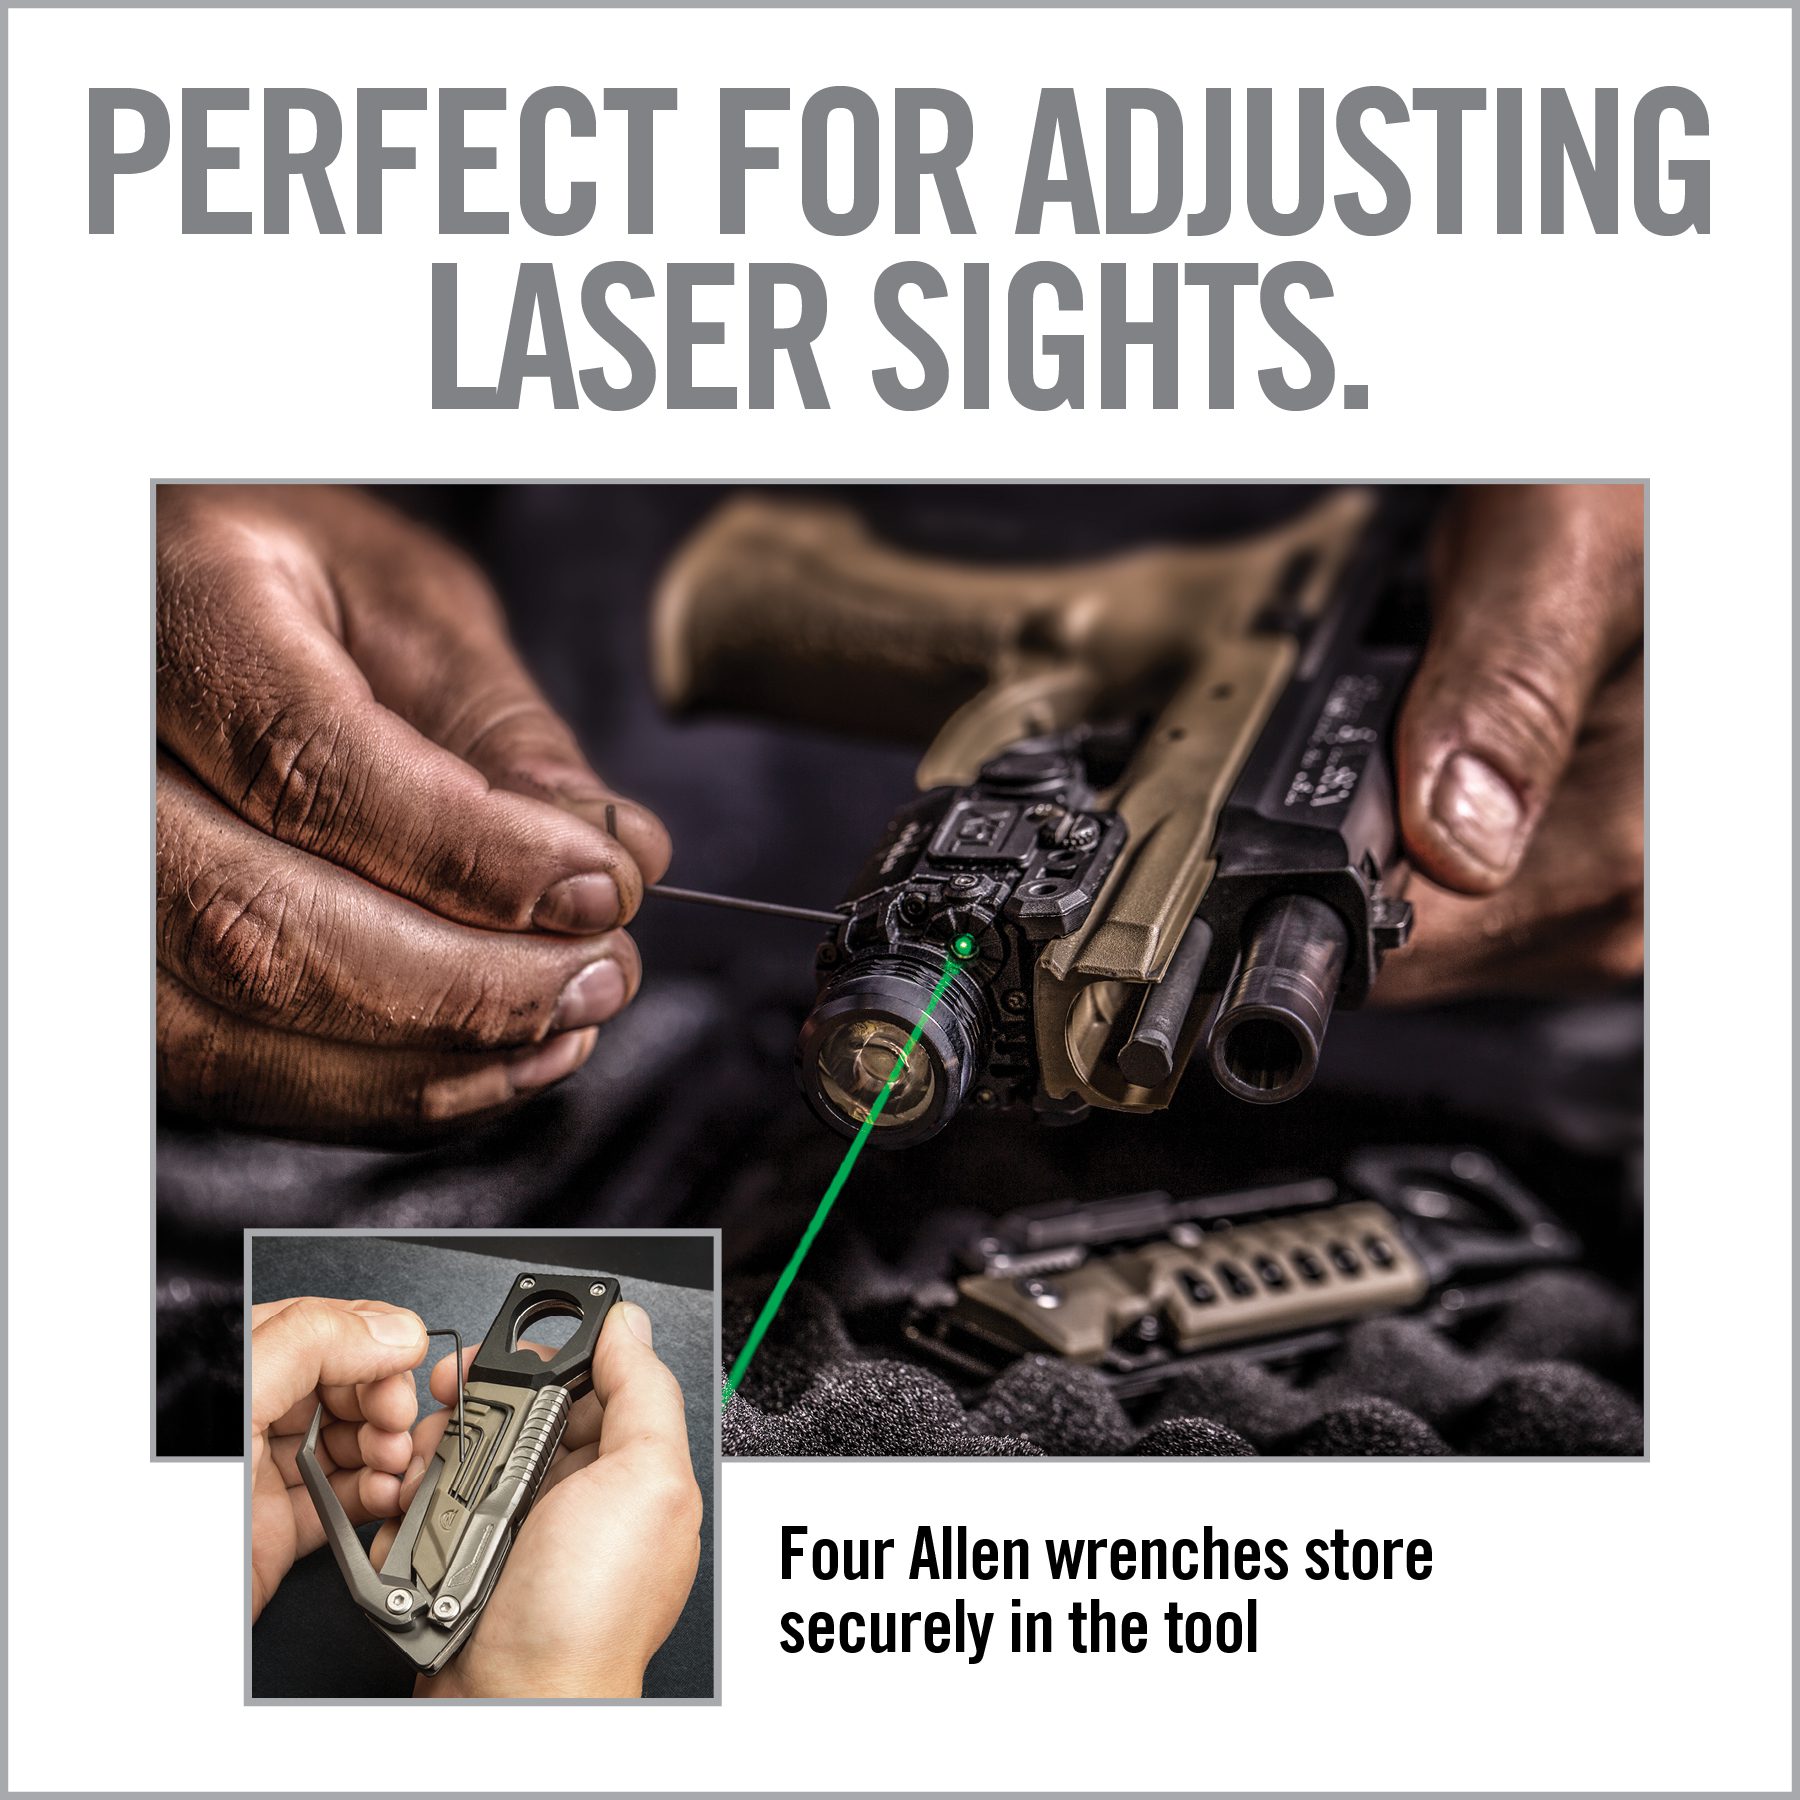 an advertisement for laser lights with two hands holding a gun